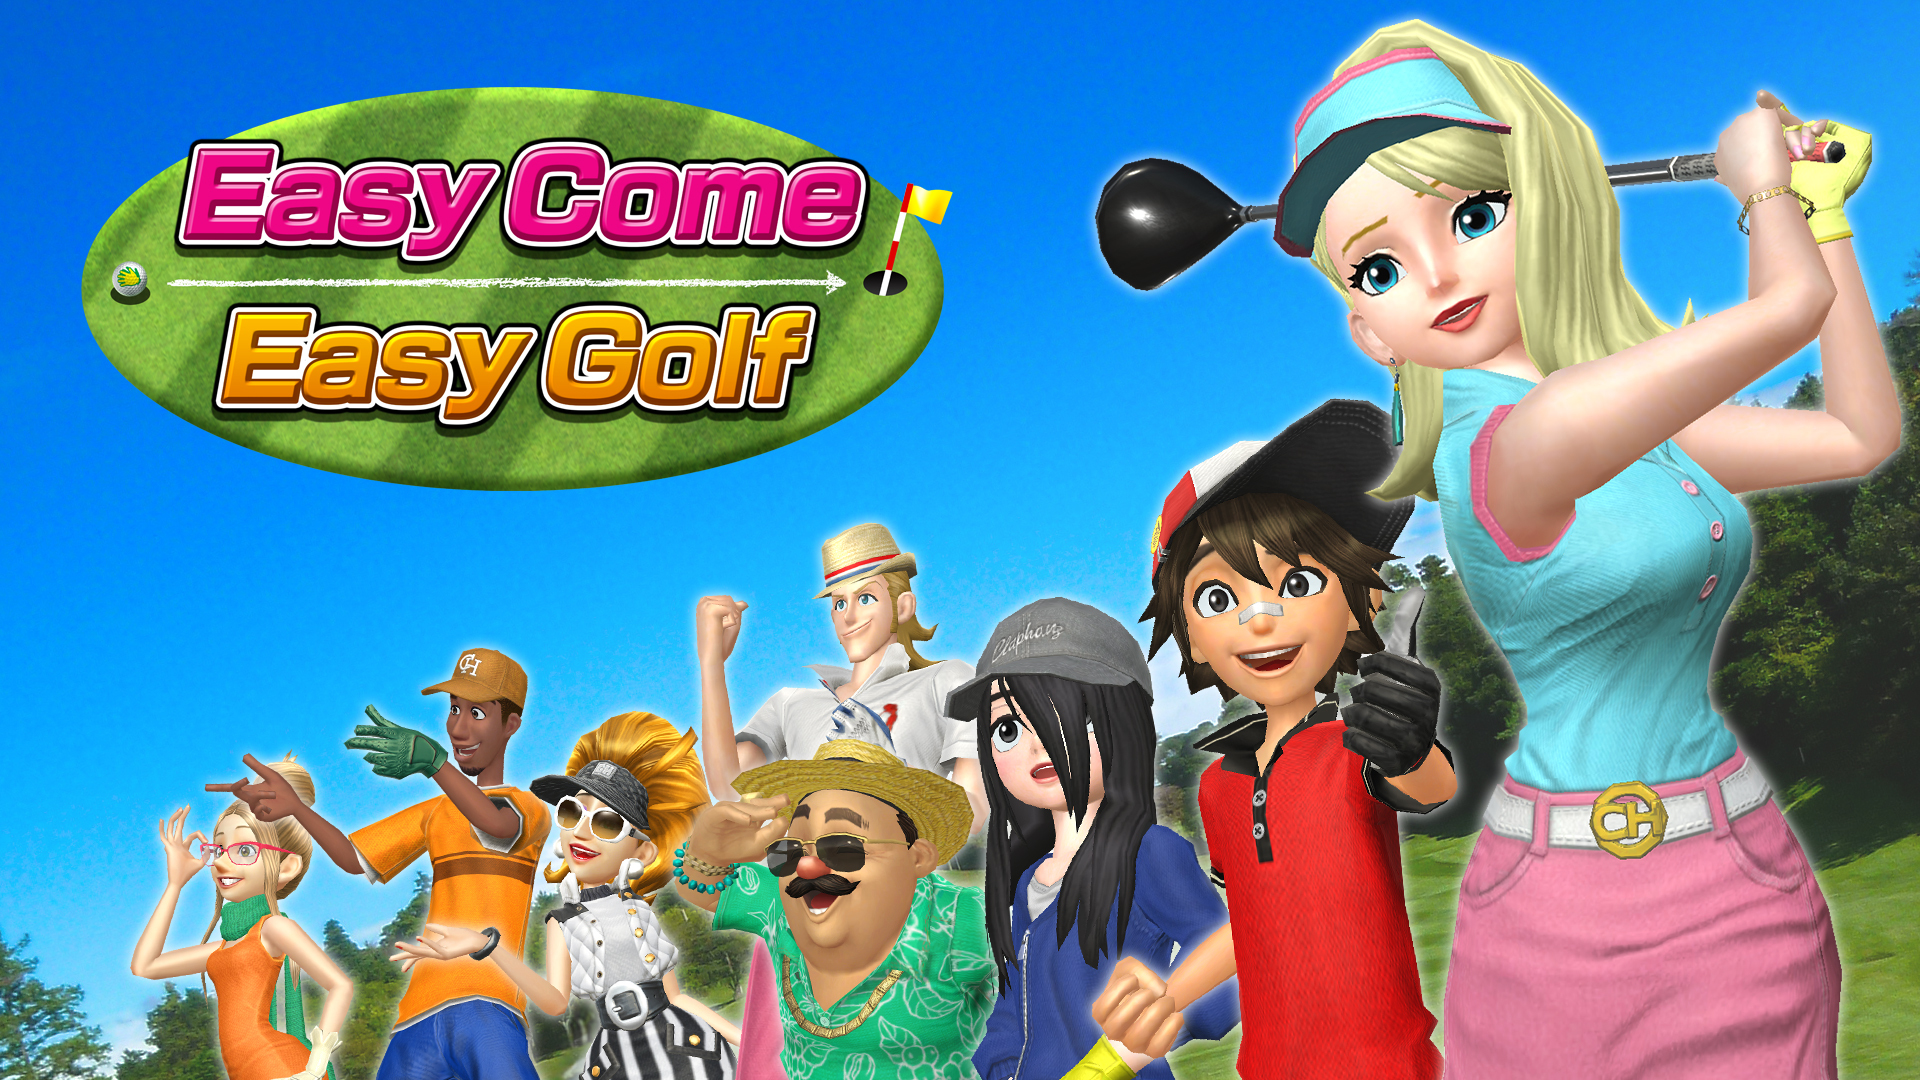 Easy Come Easy Golf